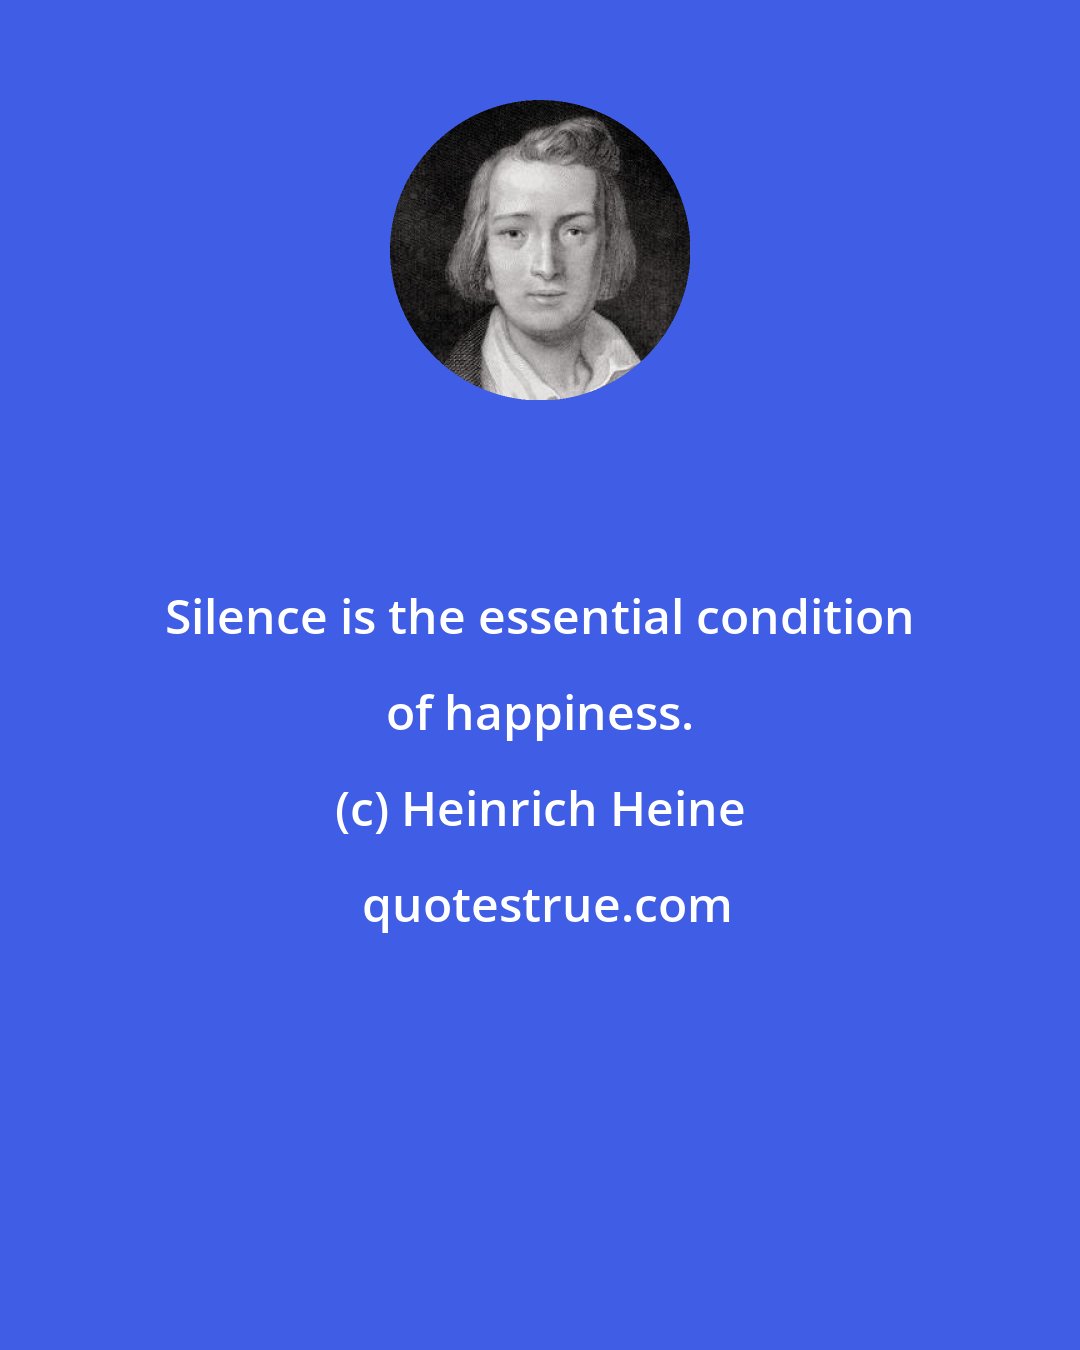 Heinrich Heine: Silence is the essential condition of happiness.